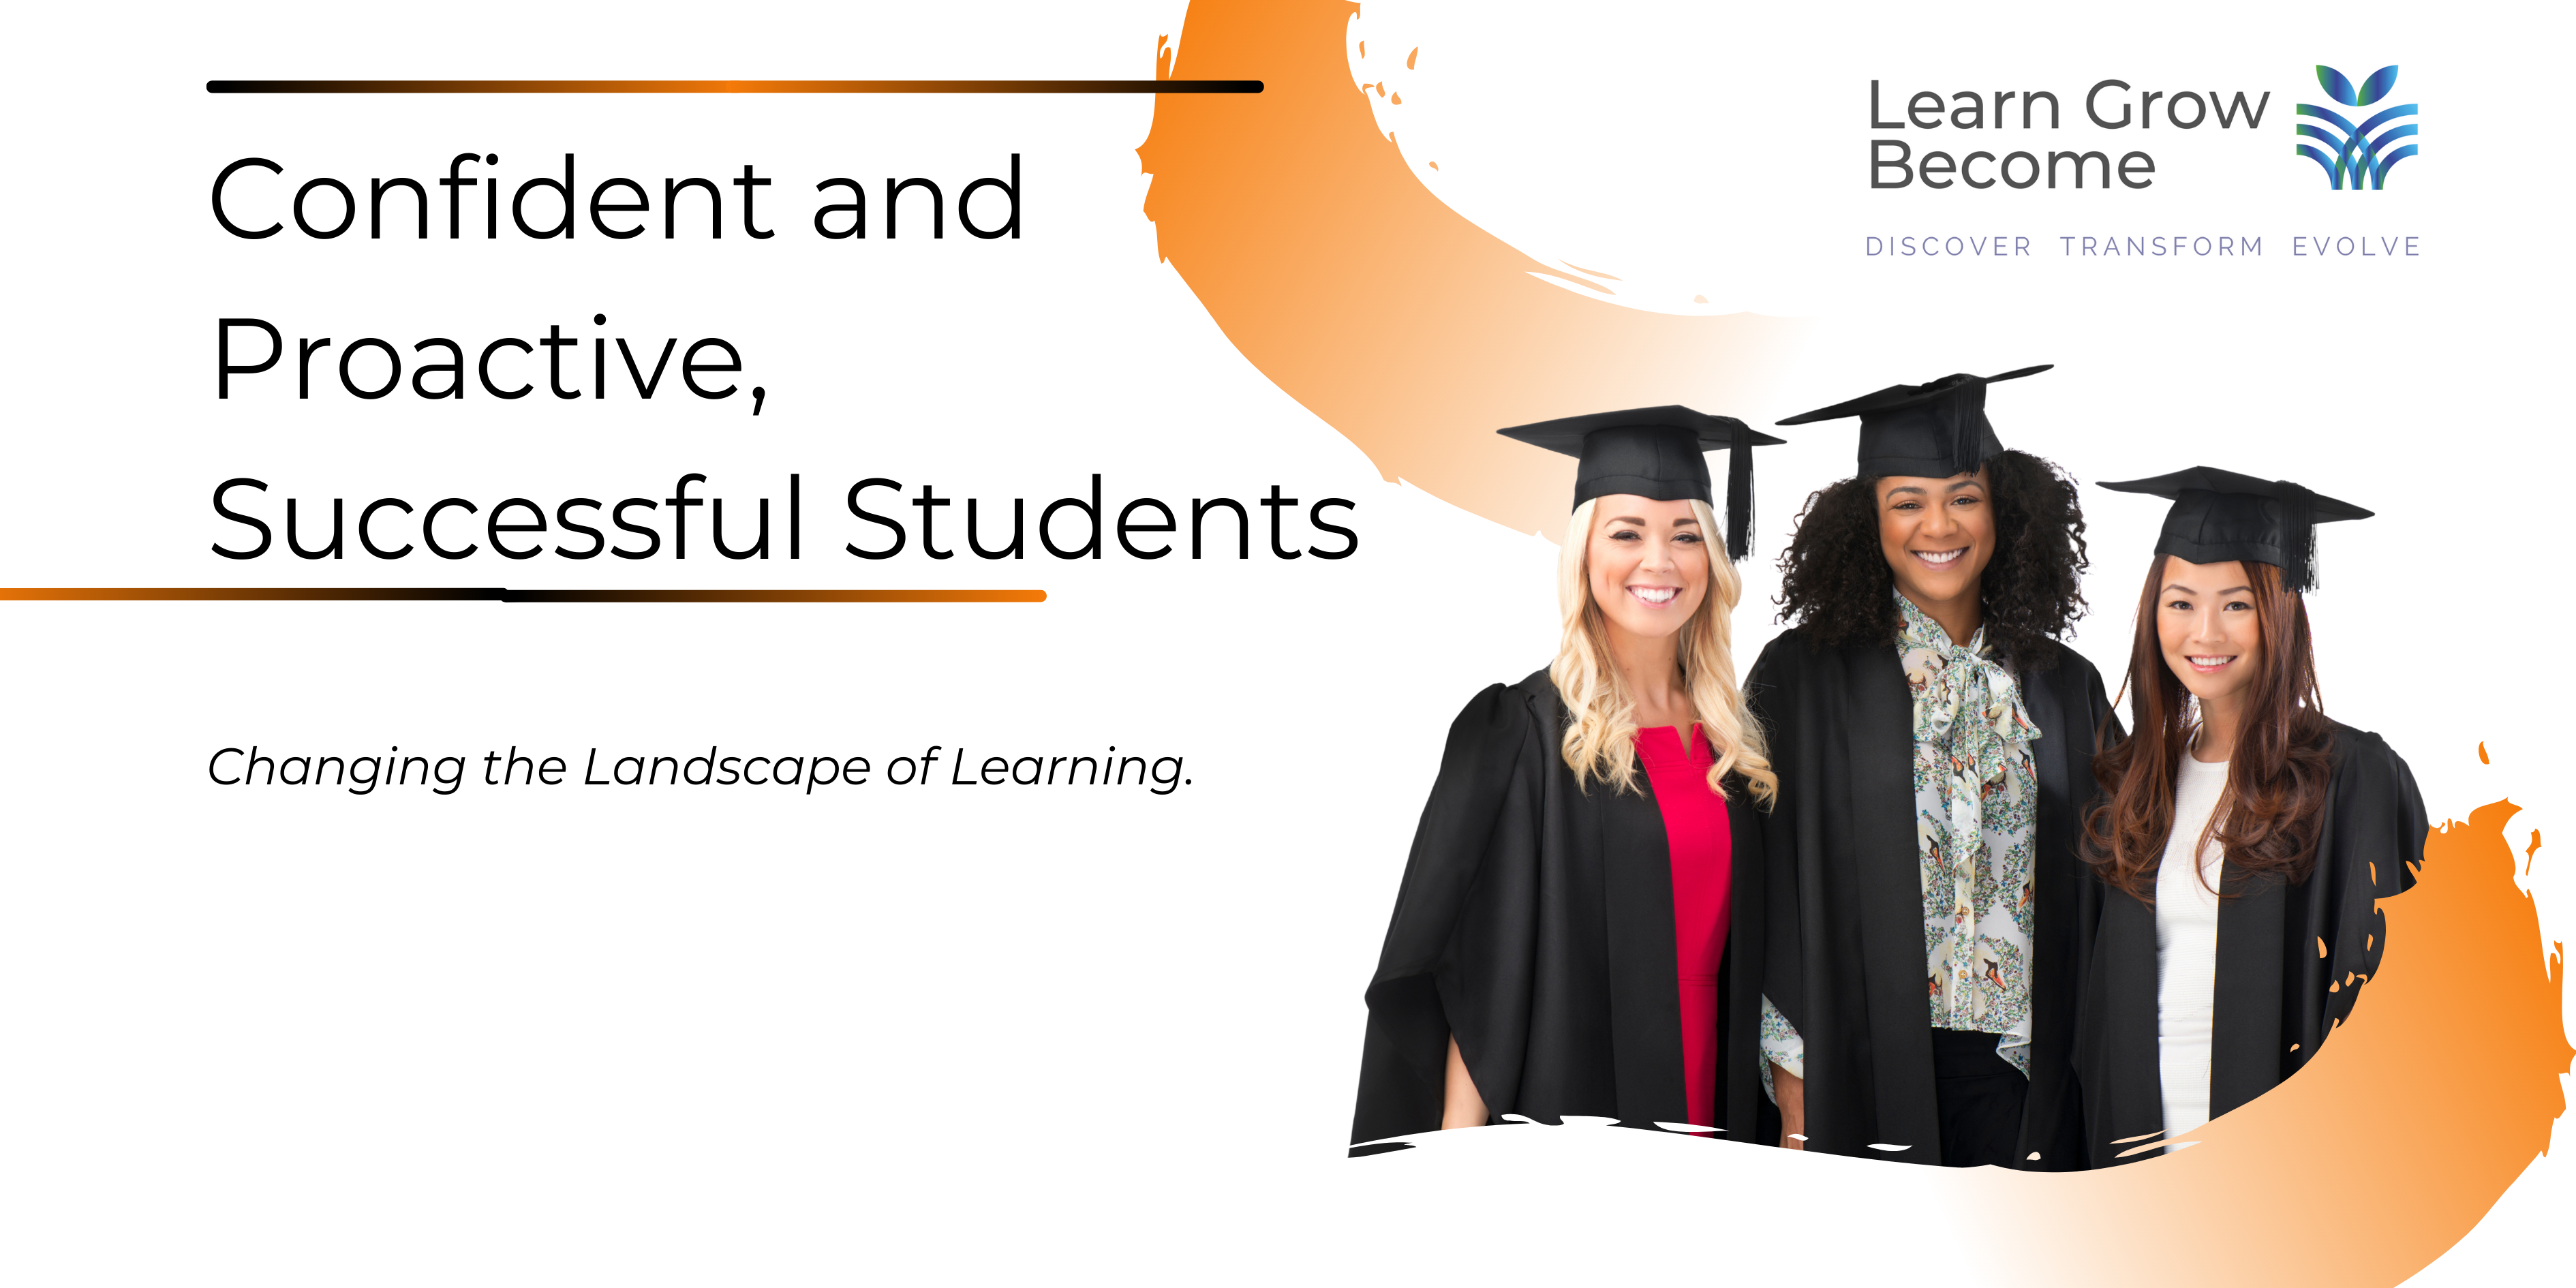 At Learn Grow Become we help you Improve Student Retention and engagement through our Learn2Learn programs